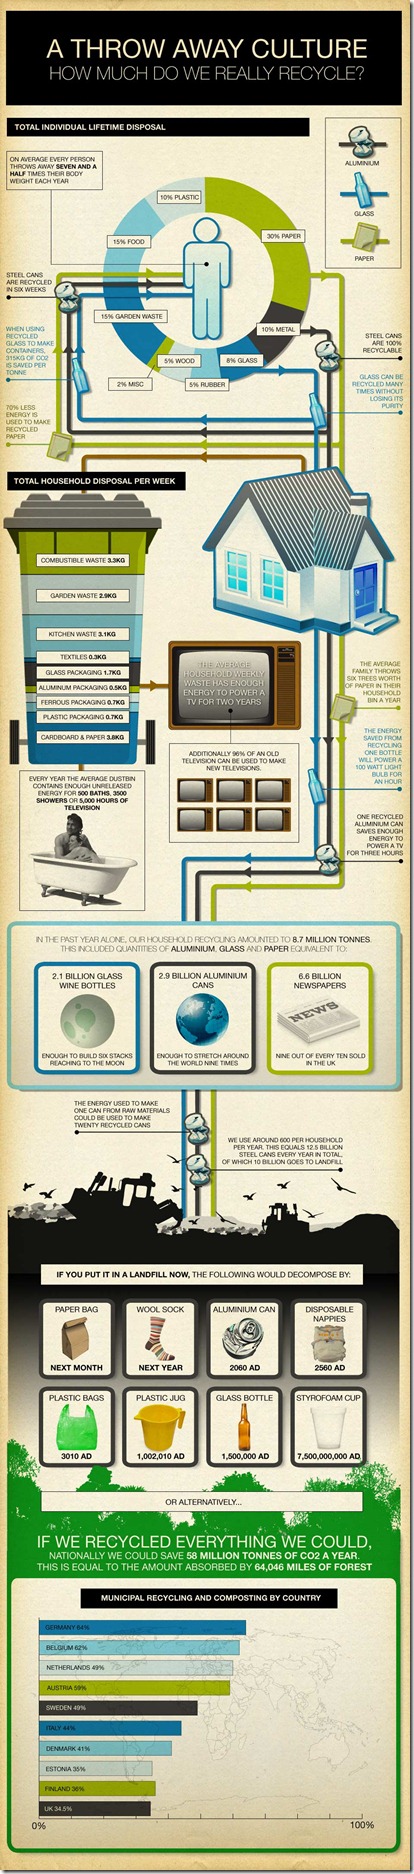 recycling-infographic